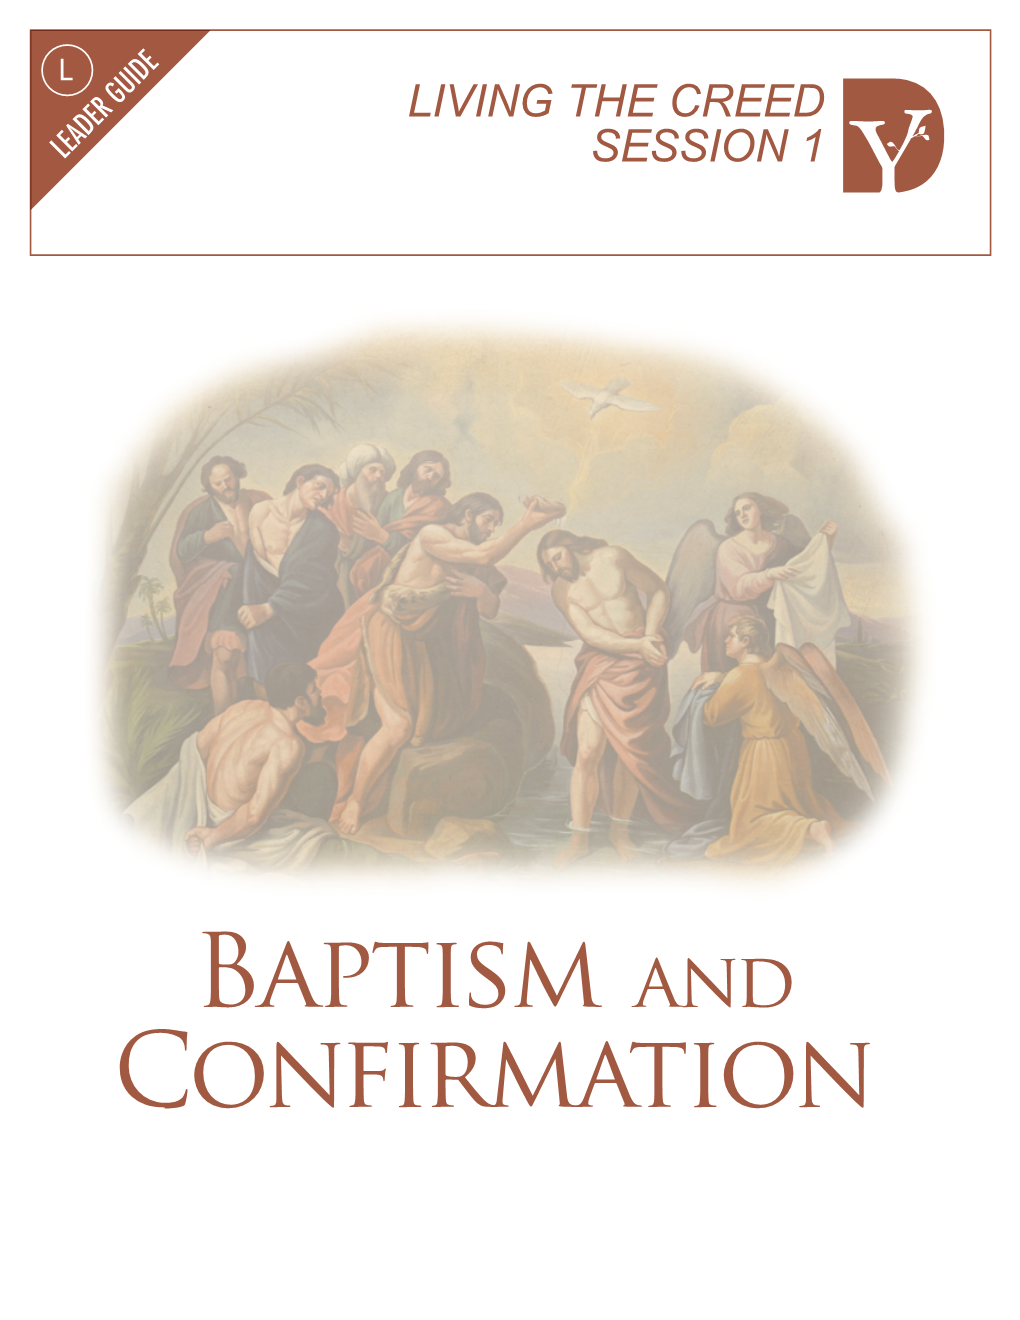 Baptism and Confirmation USER AGREEMENT